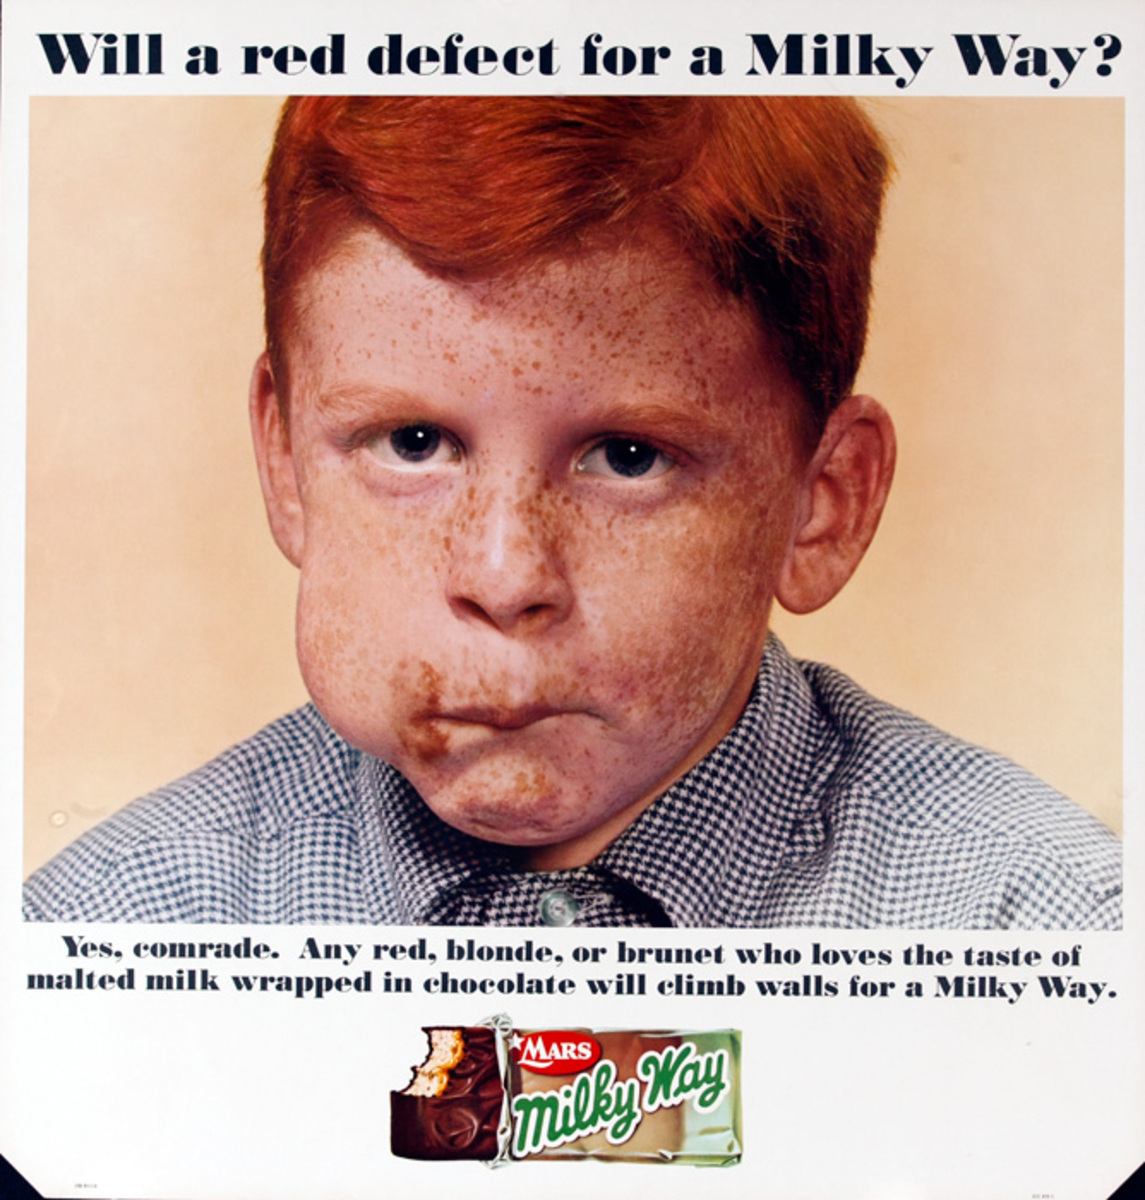 Mars Candy Original Advertising Poster, Will a red defect for a Milky Way? 